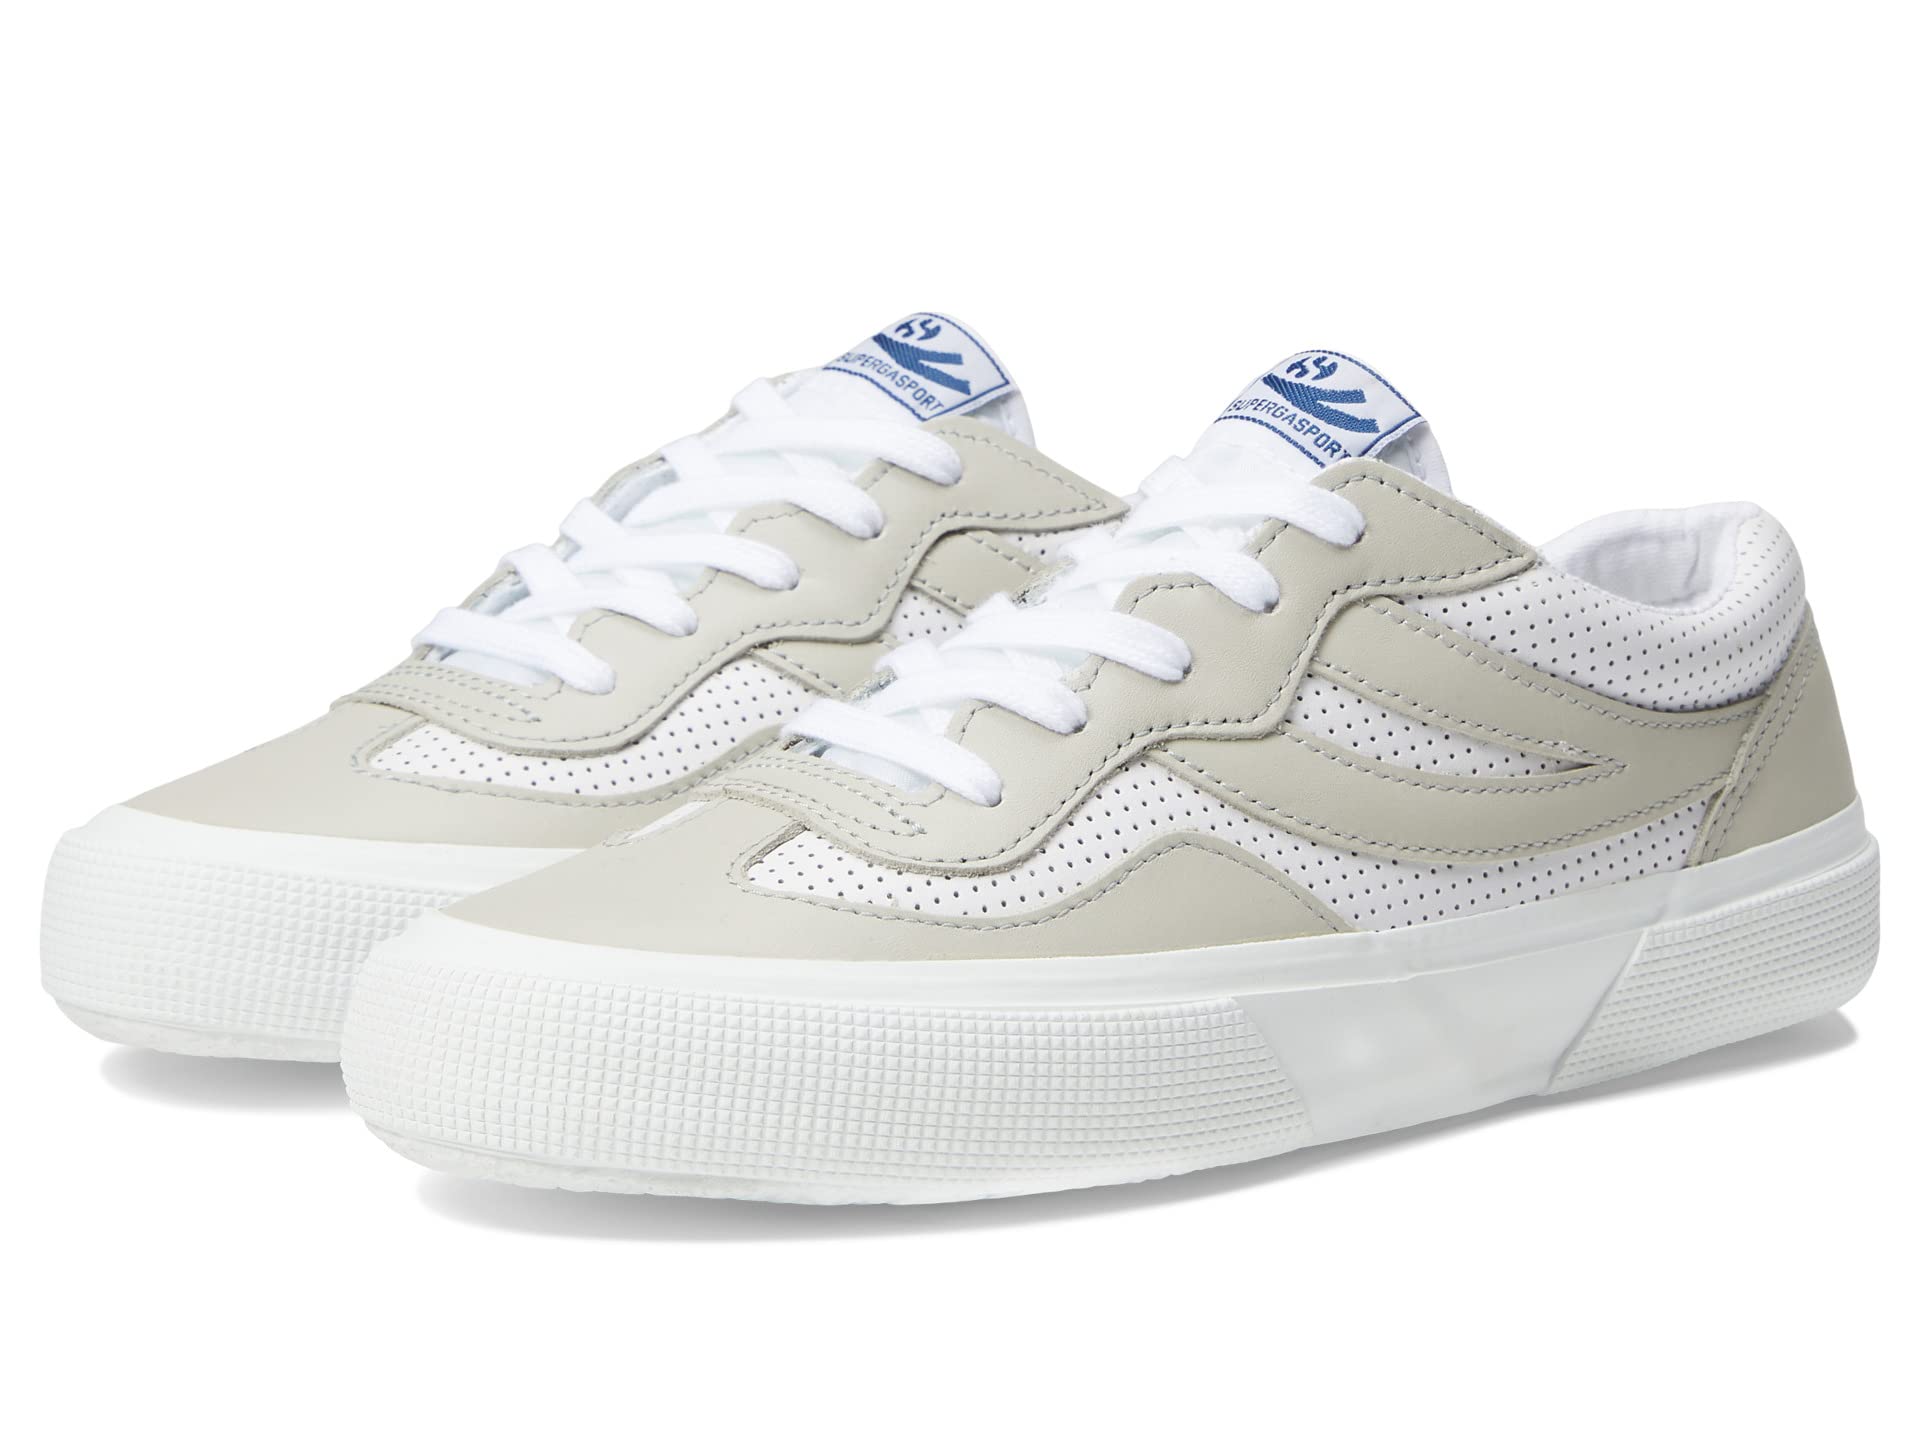 Кроссовки Superga, 2941 - Leather Perf Swallow Tail п pe cosa nost night bl int perf 100 м 076003